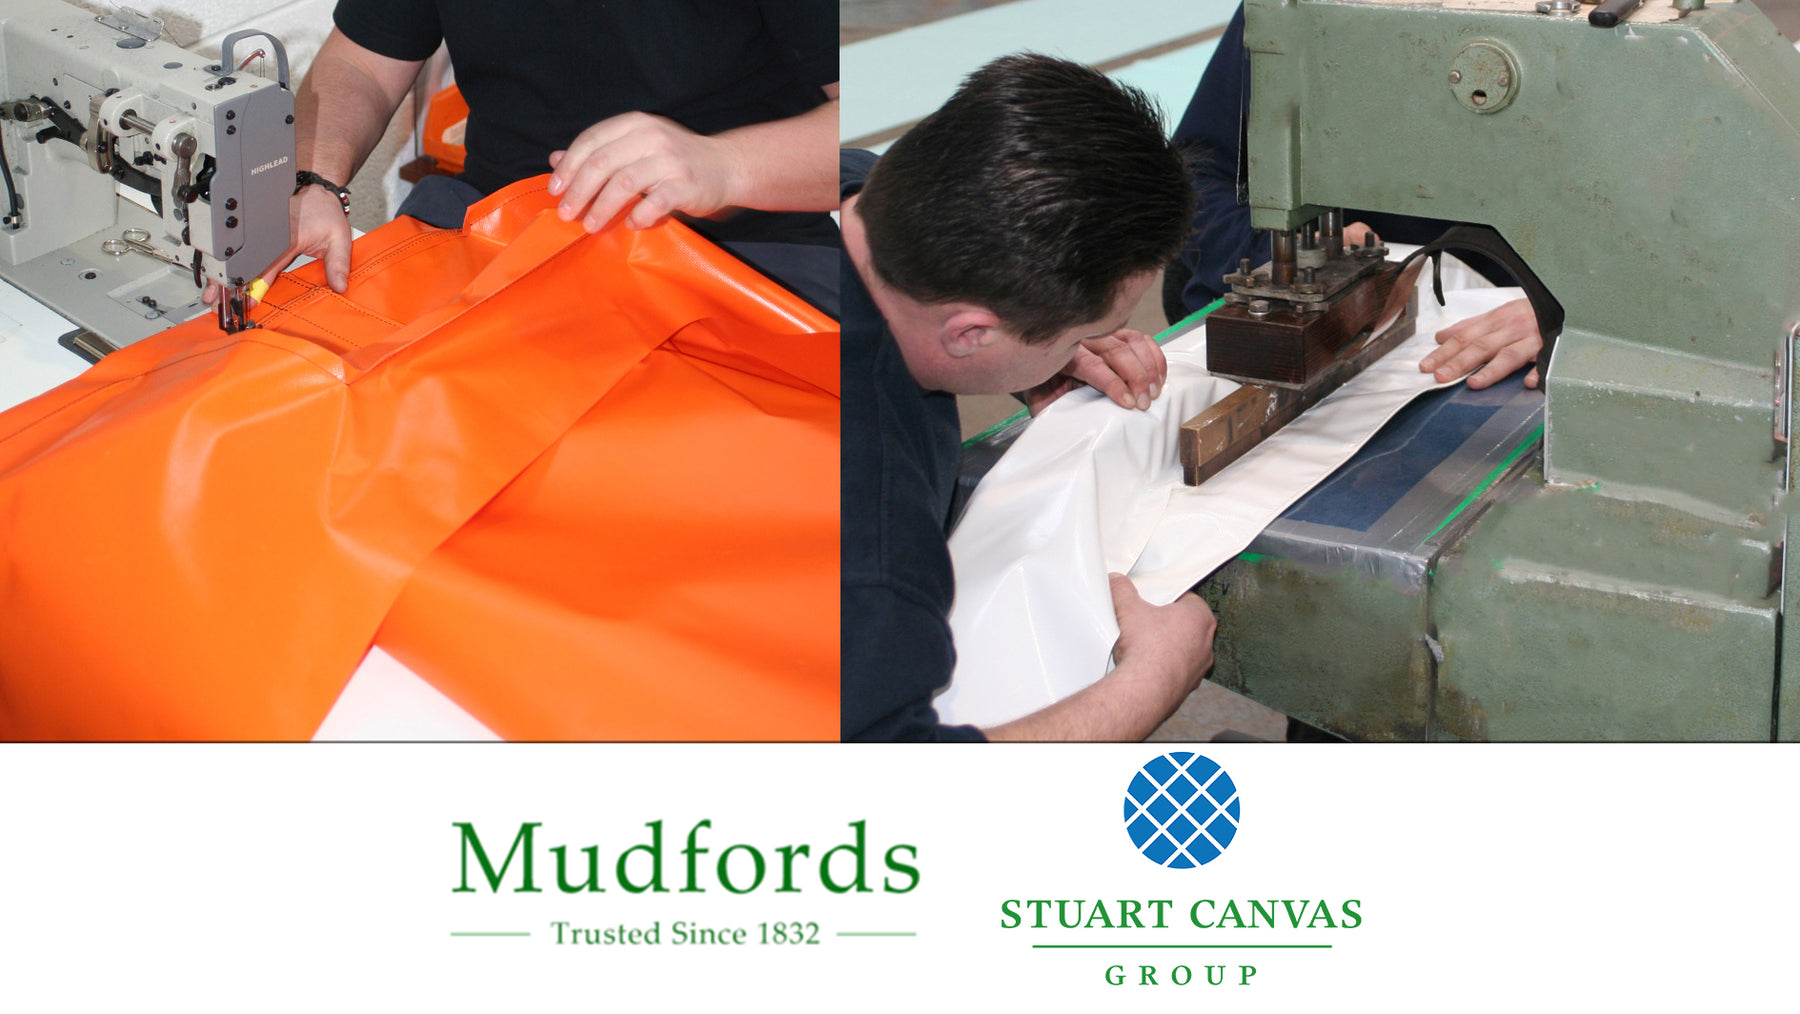 How Mudfords & Stuart Canvas Group can help during the Coronavirus outbreak.